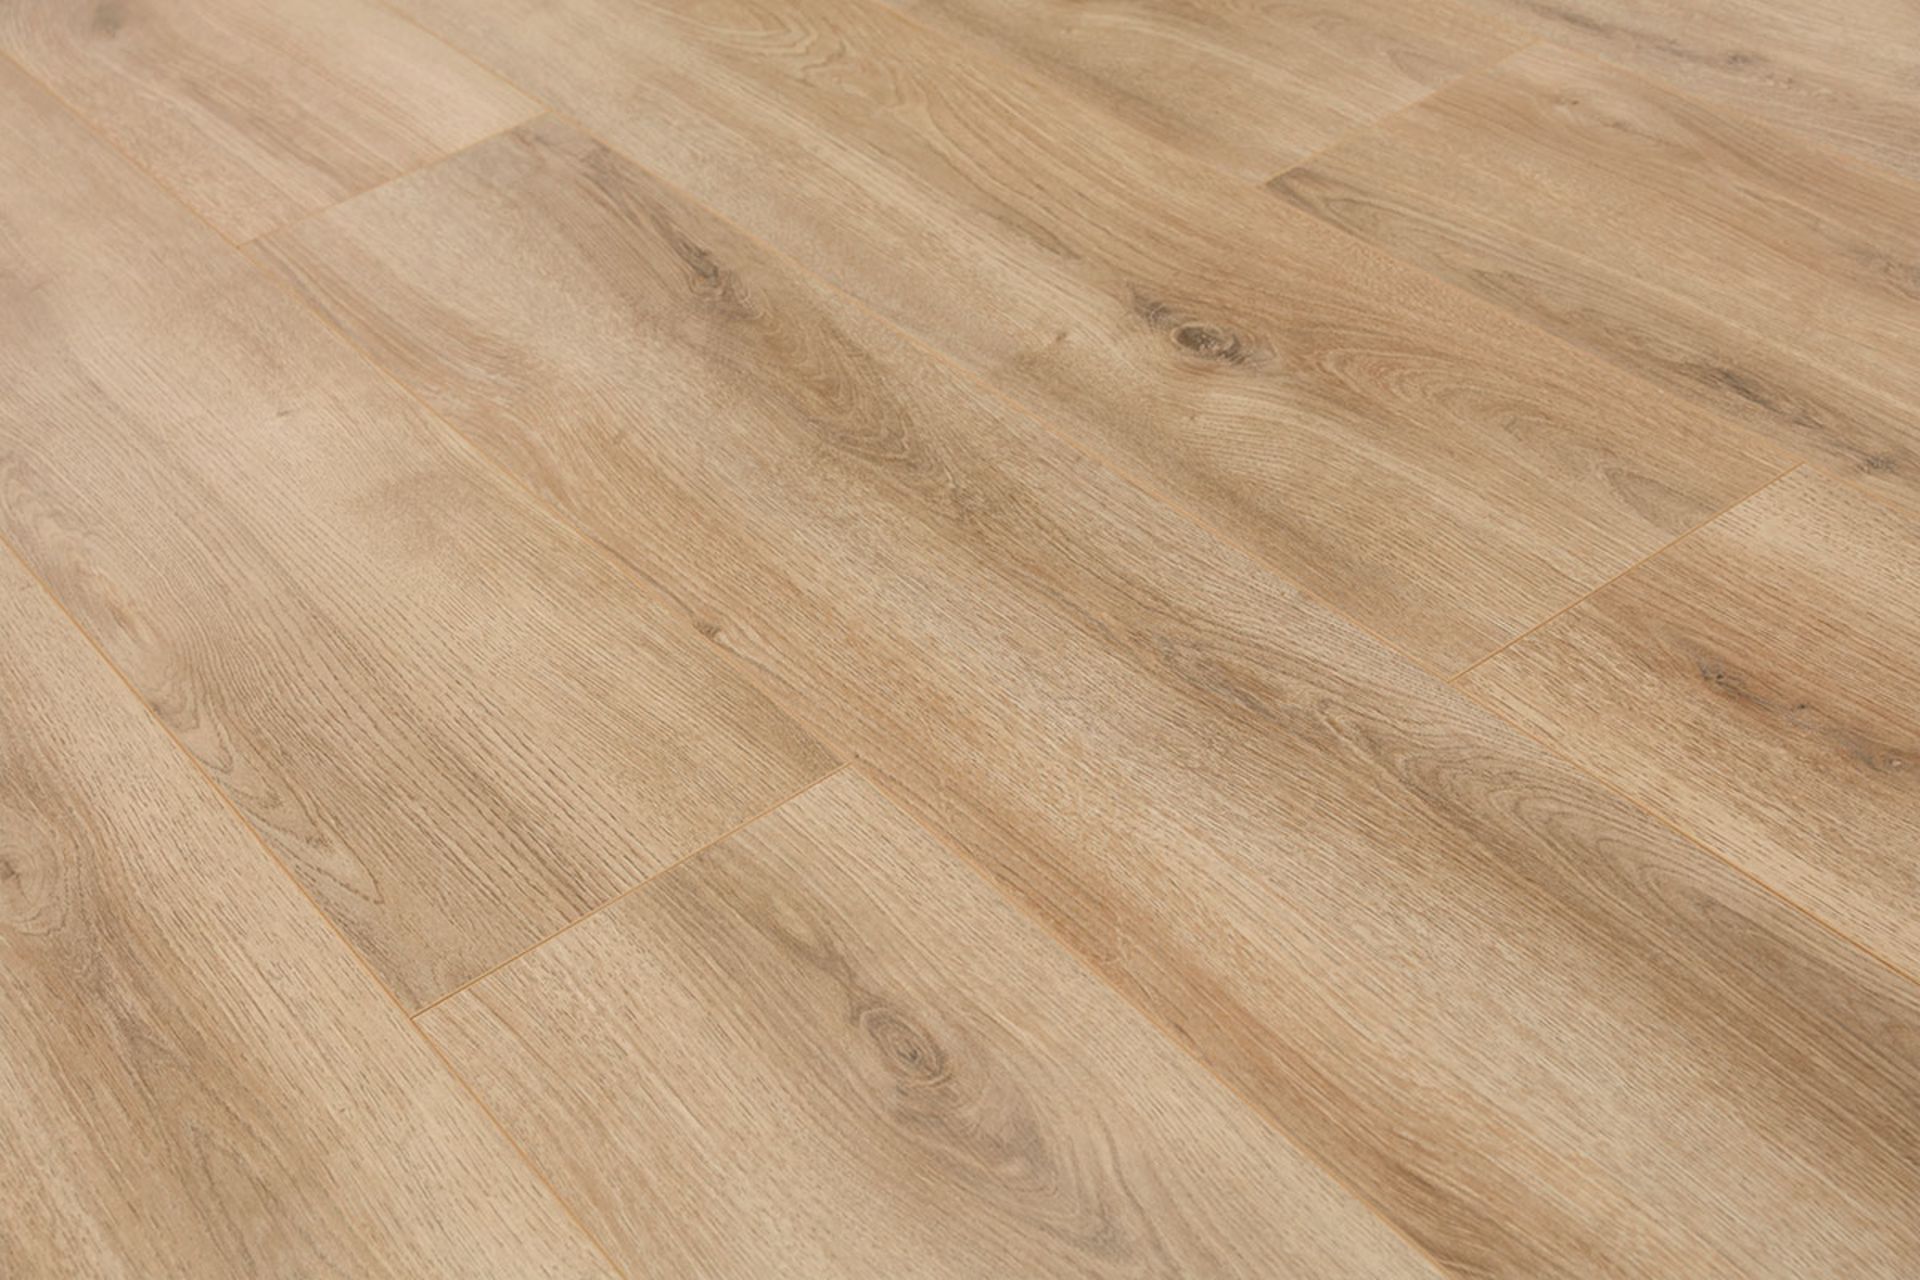 7.17 Square Meters of LAMINATE FLOORING SUMMER NATURAL OAK. With a warming natural oak tone, this - Image 2 of 2